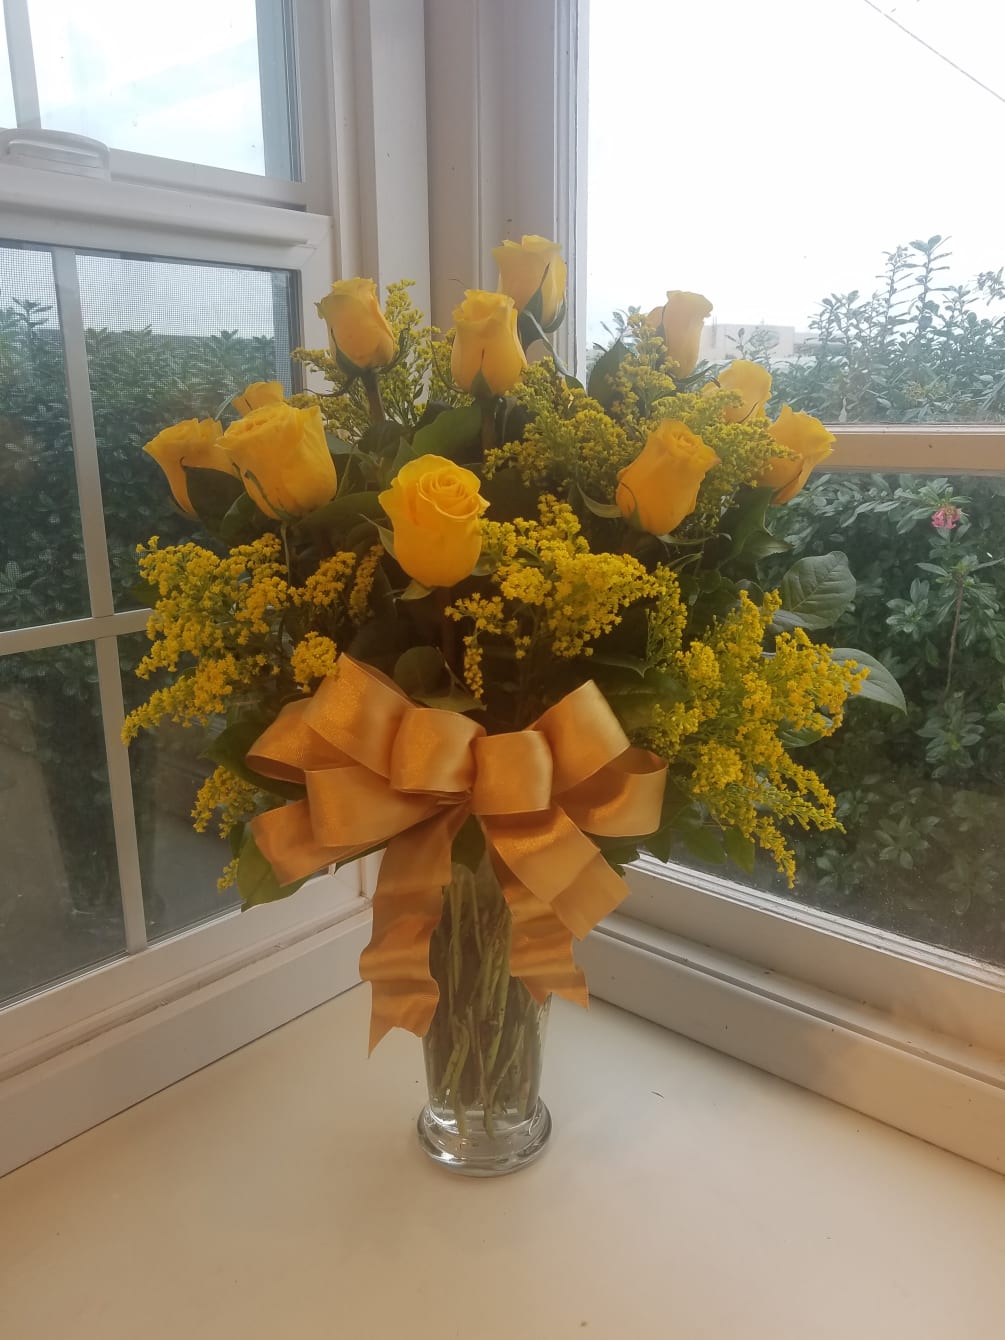 One dozen yellow roses will bring a smile and touch of sunshine